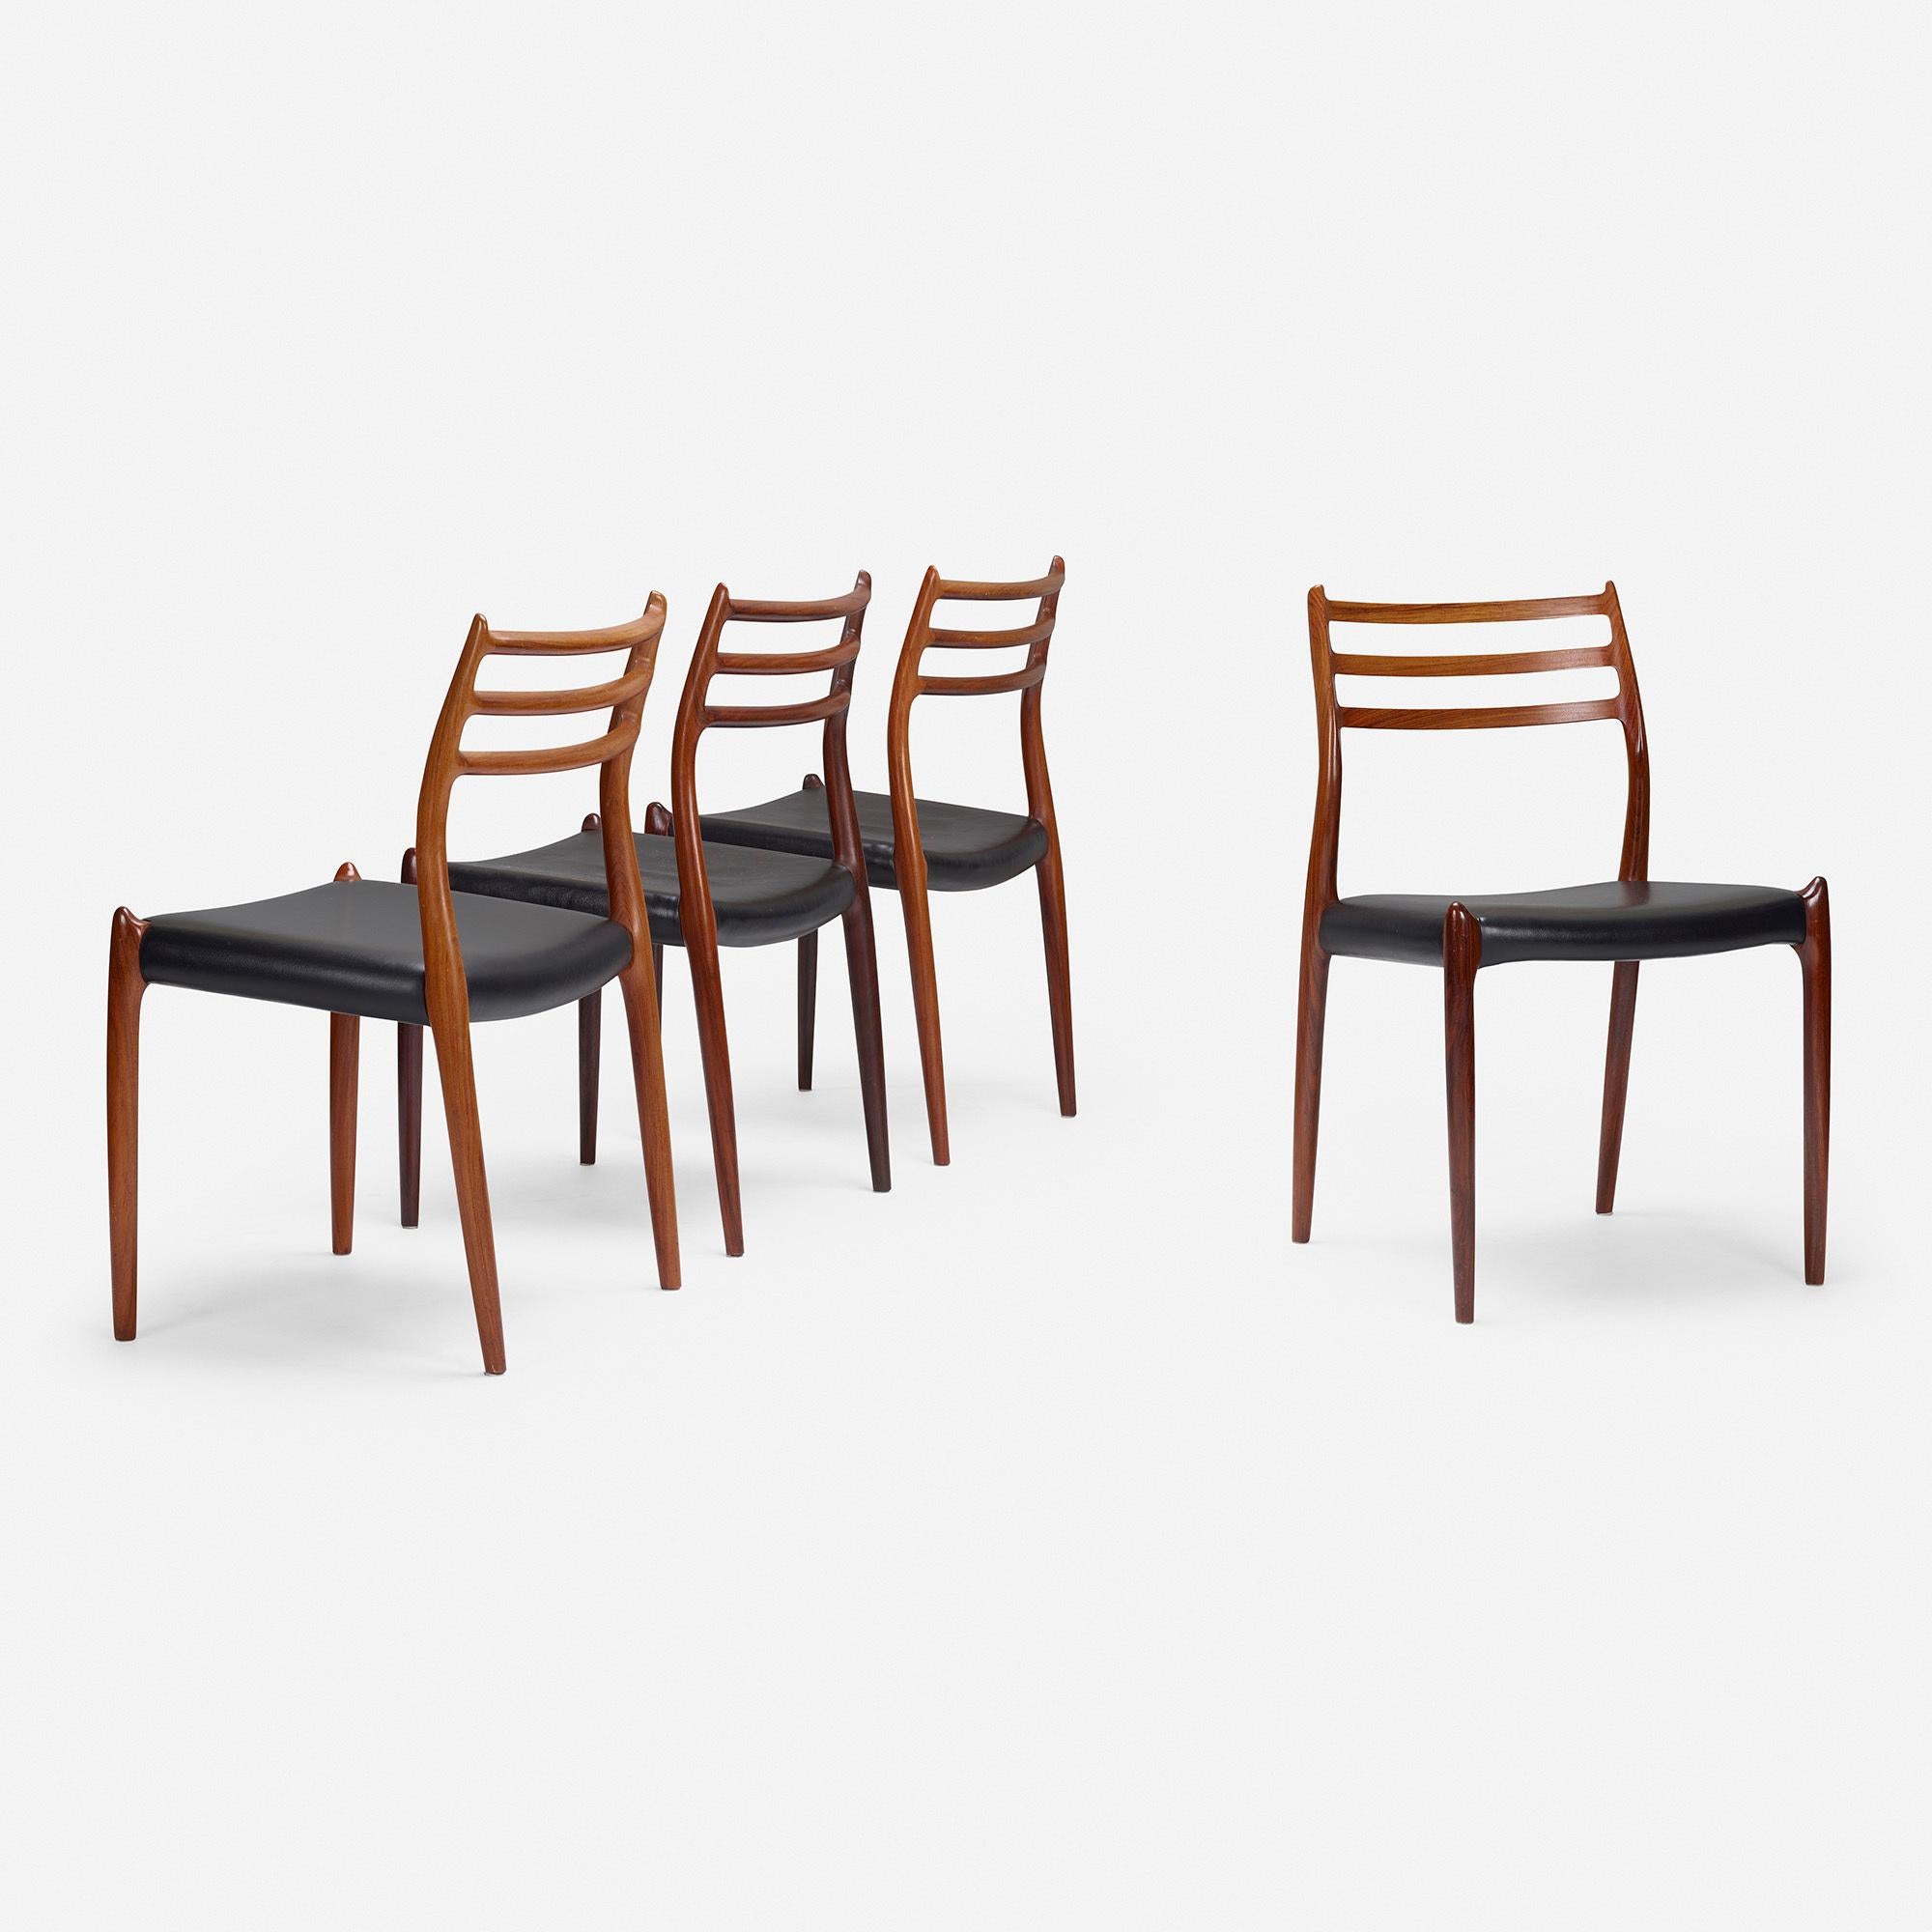 Set off four dining chairs by Niels O. Møller

Impressed manufacturer's mark to underside of two examples ‘JL Møller Models Made in Denmark’ with impressed Danish control tags. Decal Danish control tags to underside of two examples.

Additional